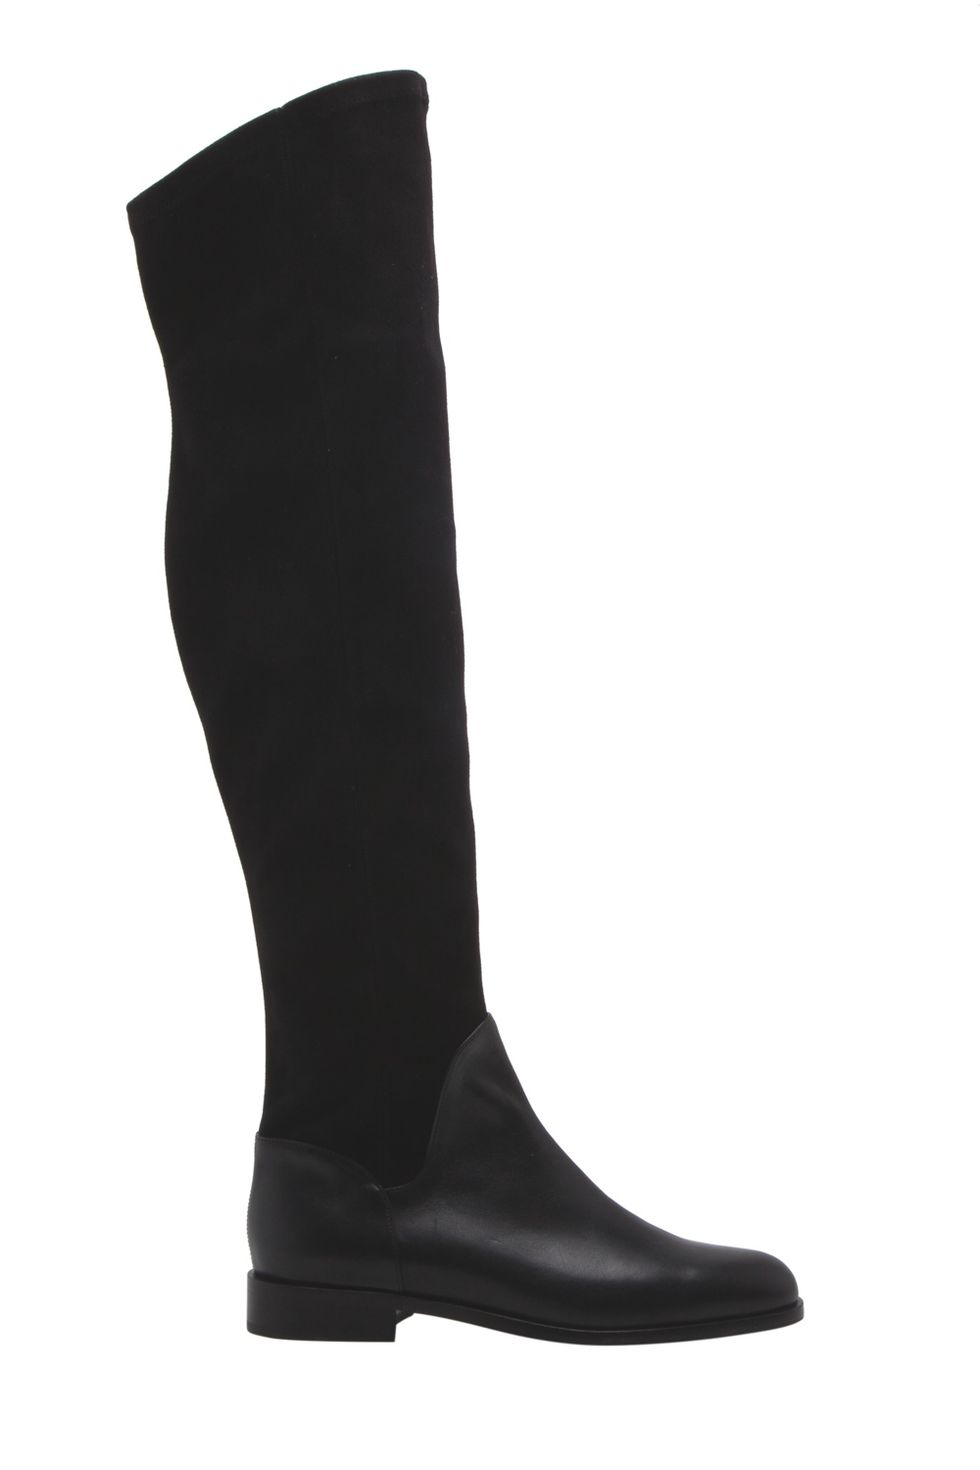 Footwear, Boot, Shoe, Knee-high boot, Riding boot, Leather, Durango boot, Suede, Work boots, 